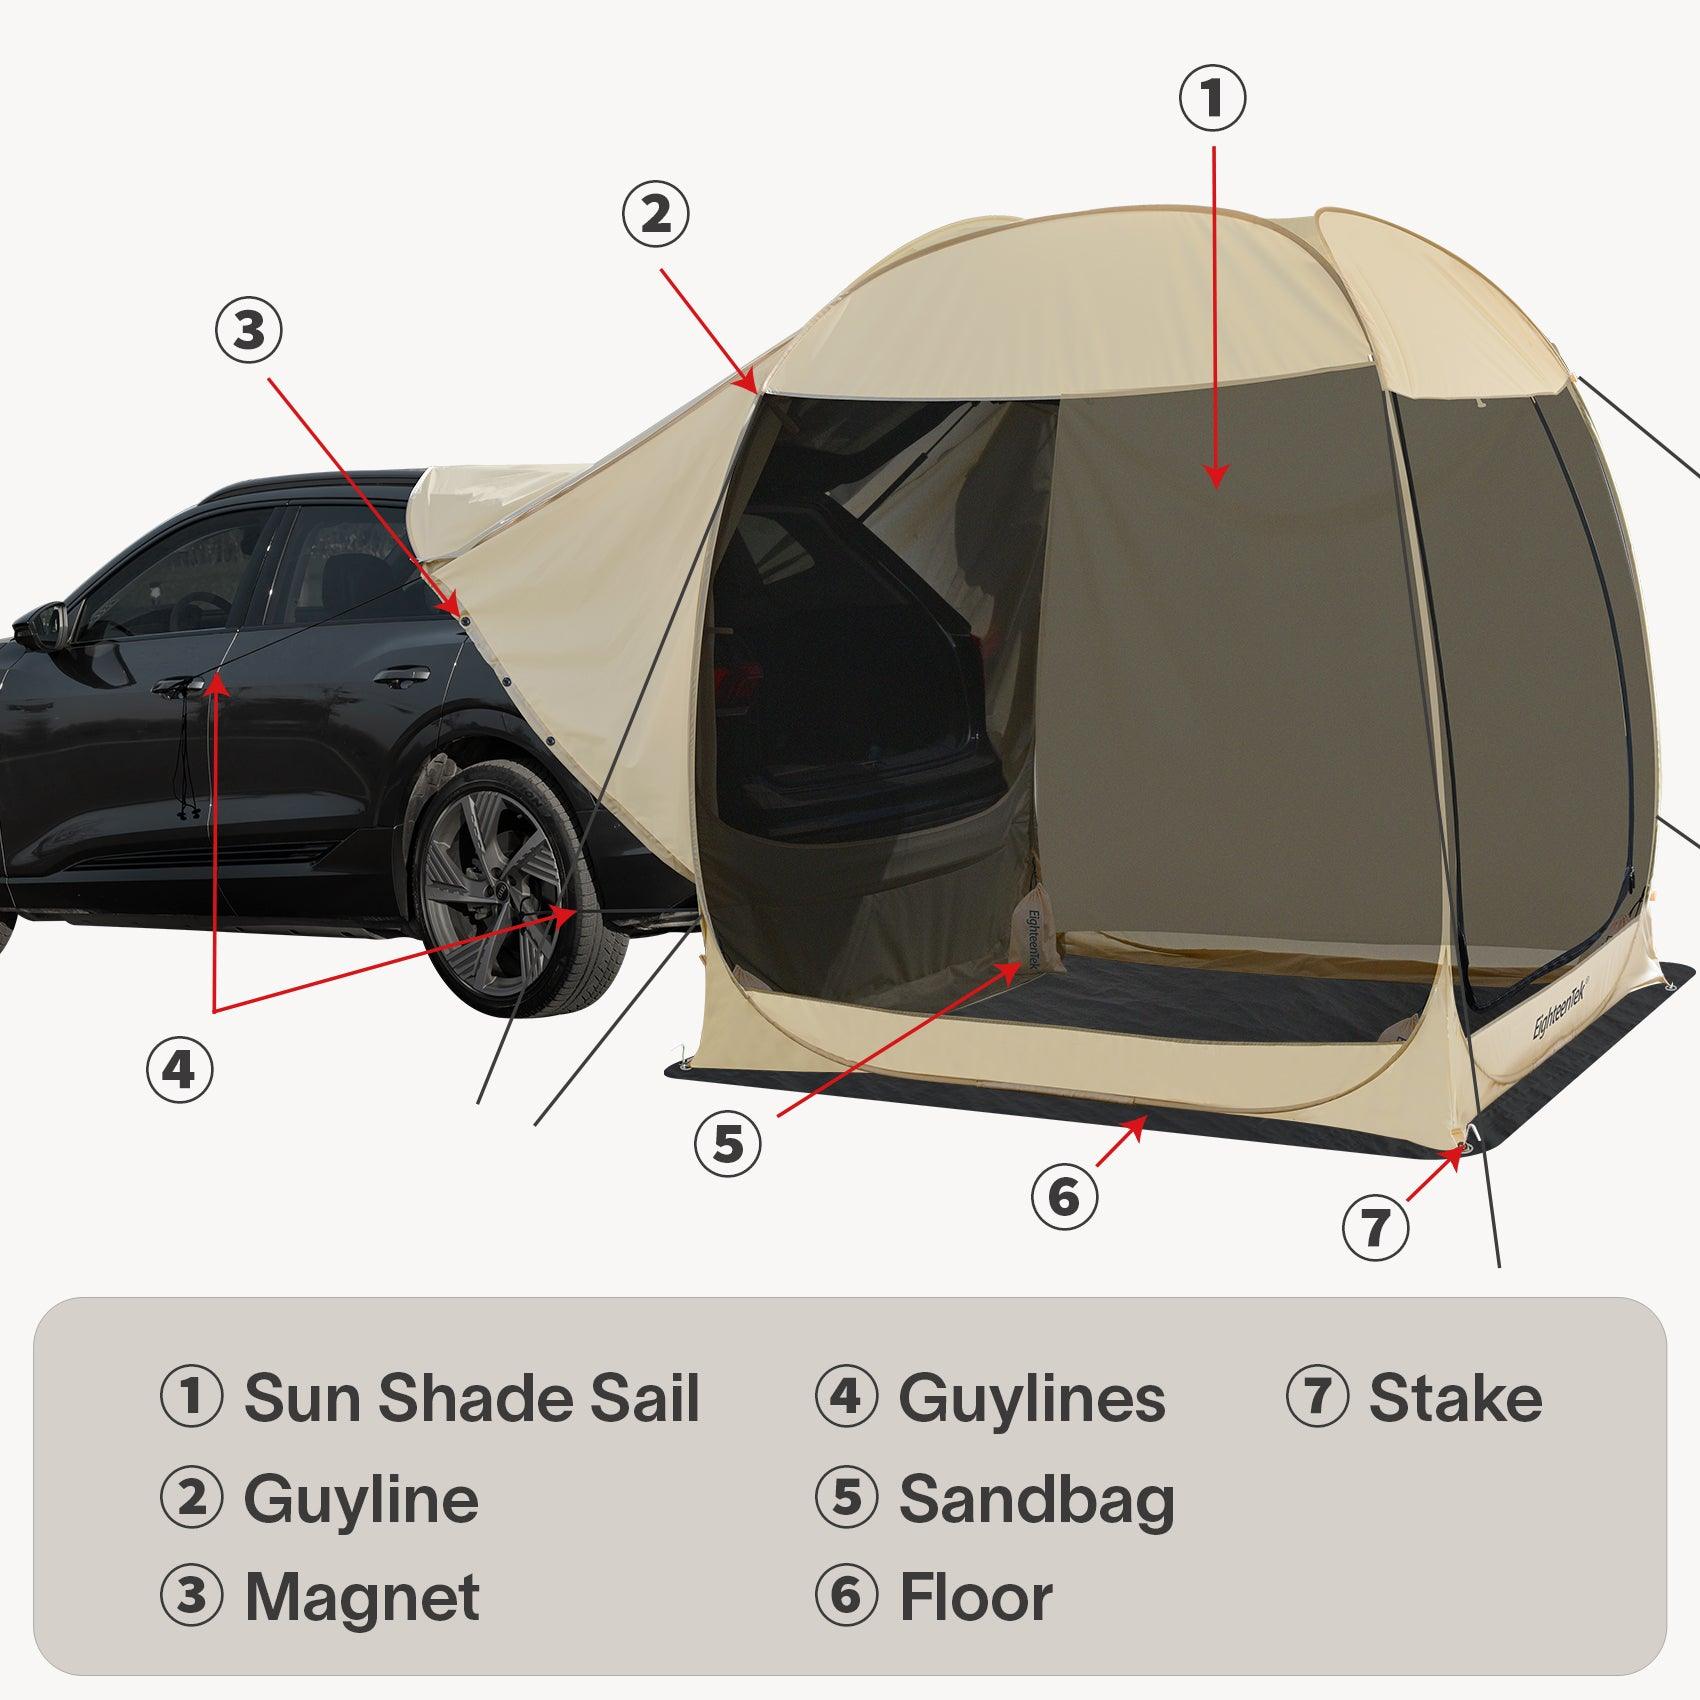  Car Rear Tent Hatchback Tents SUV Camping Tent